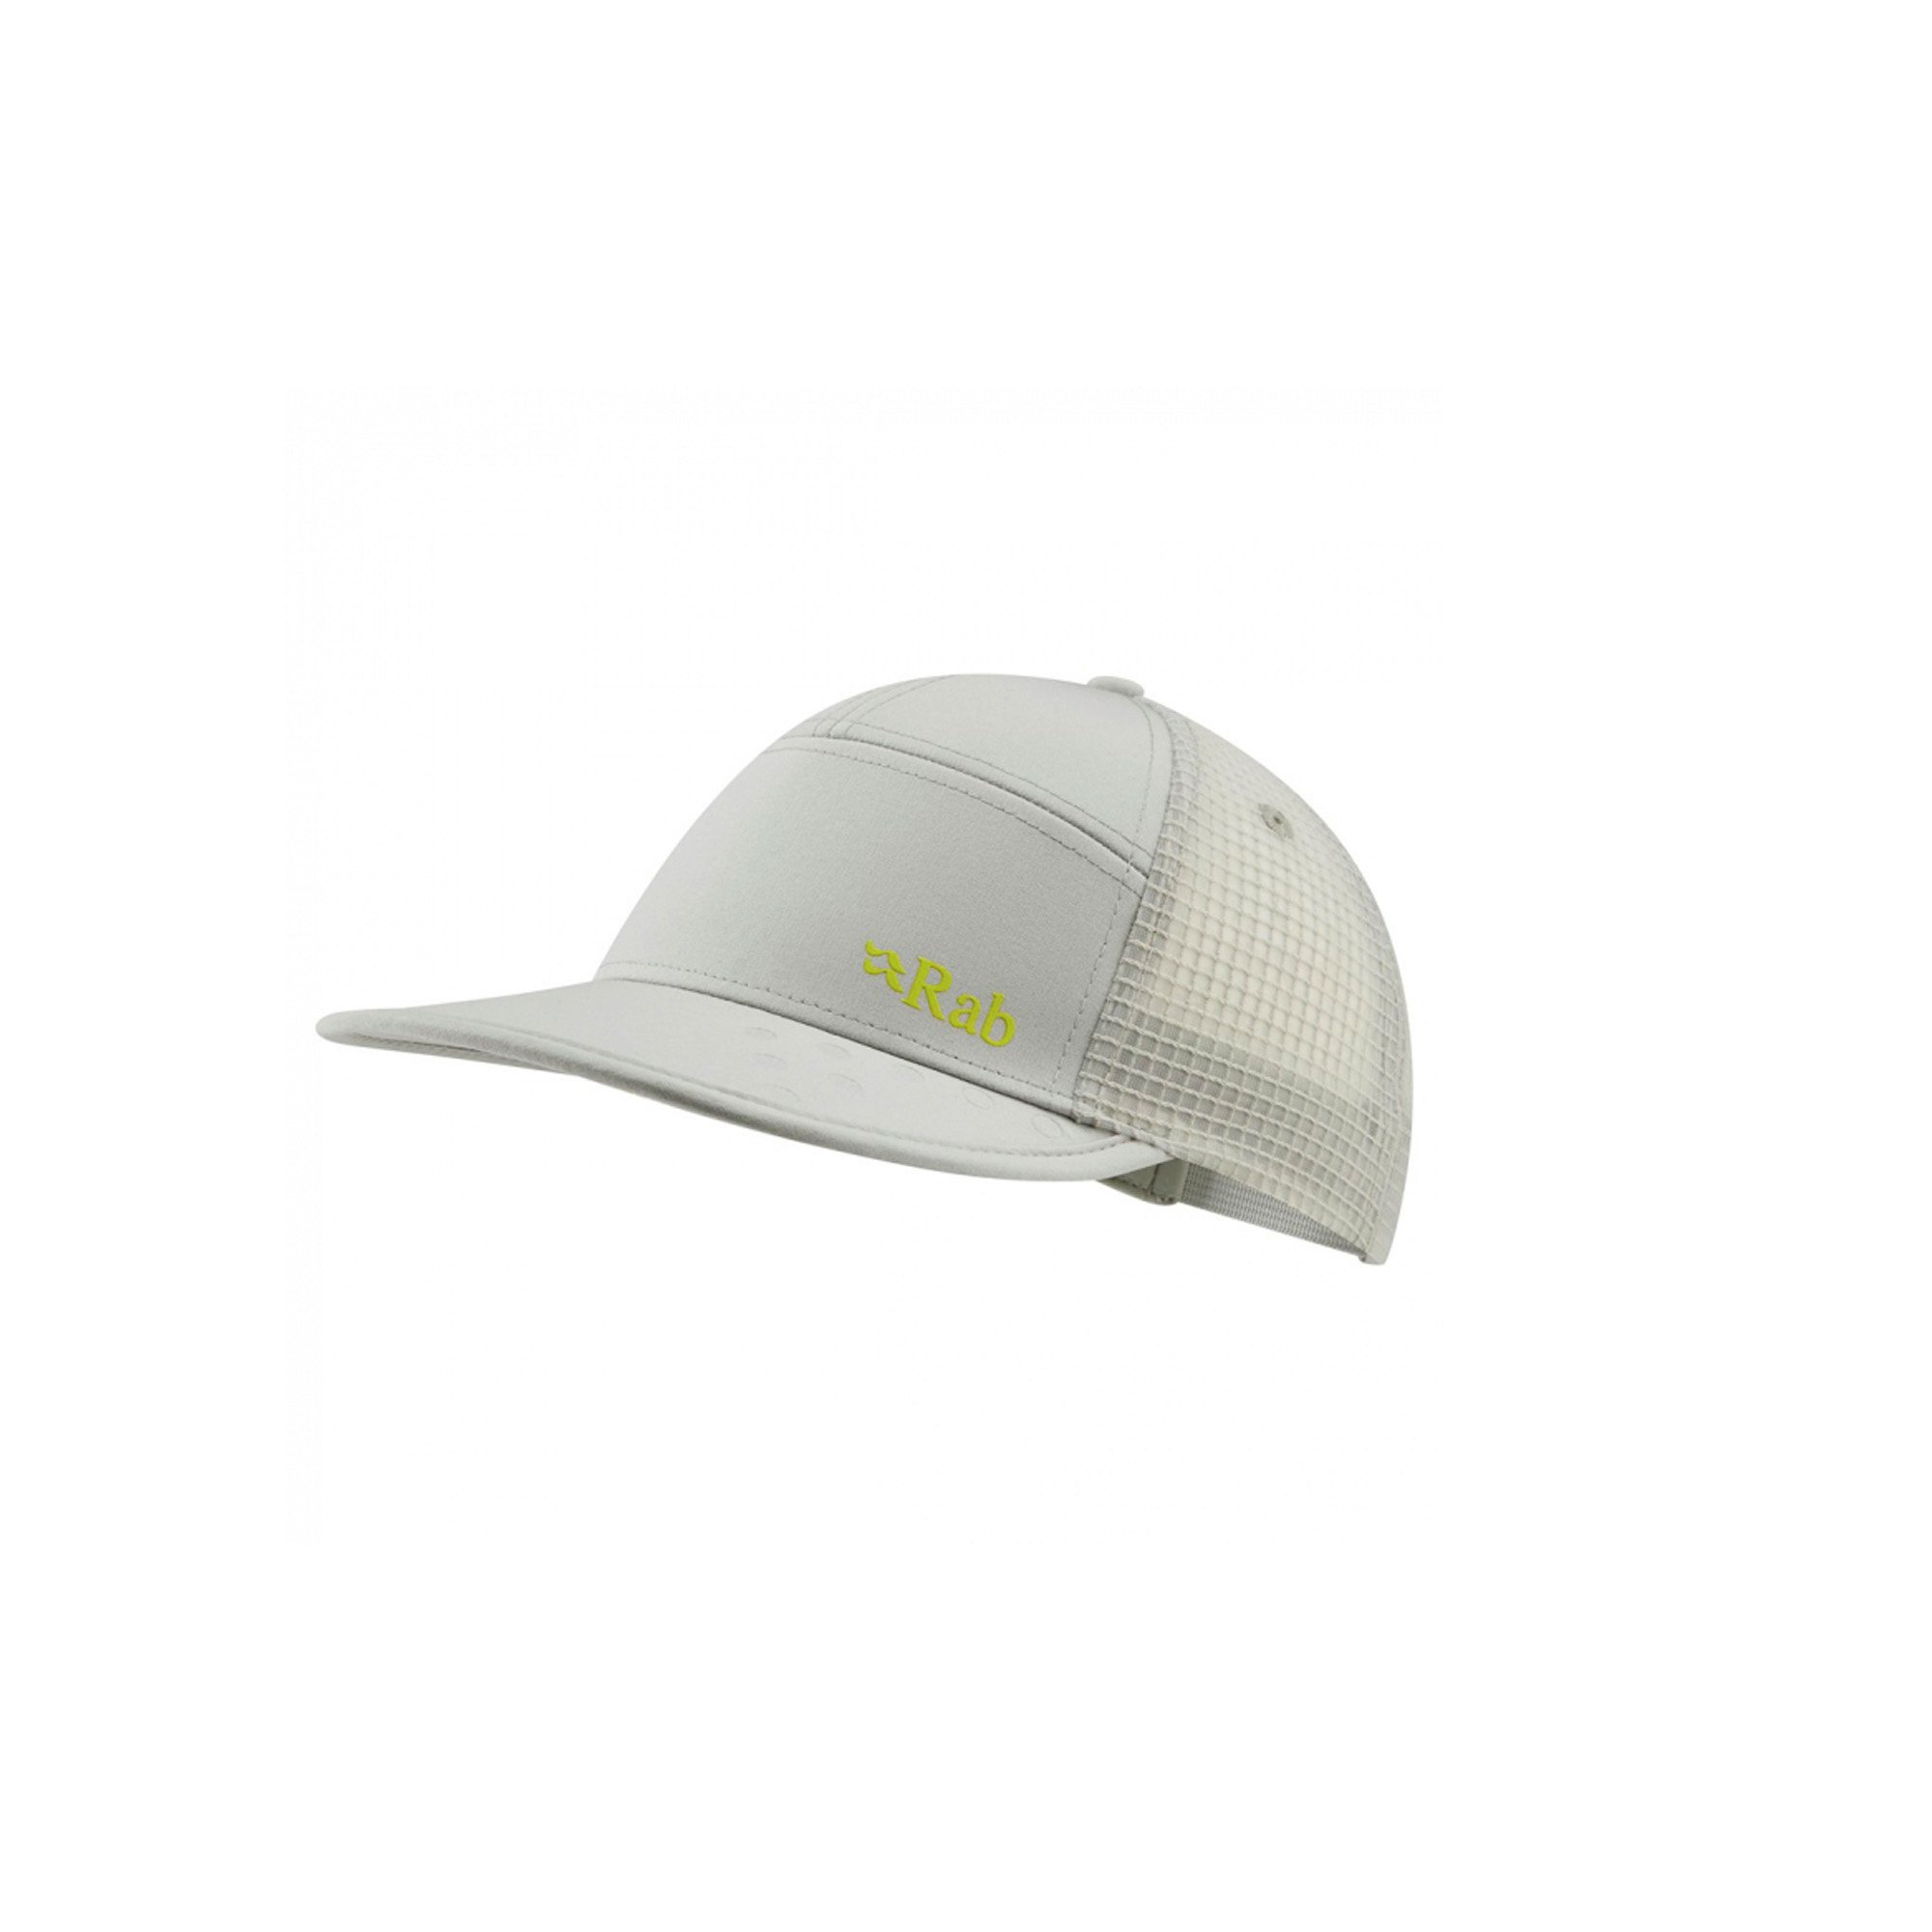 rab RAB Casquette Skyline Cloud One Size